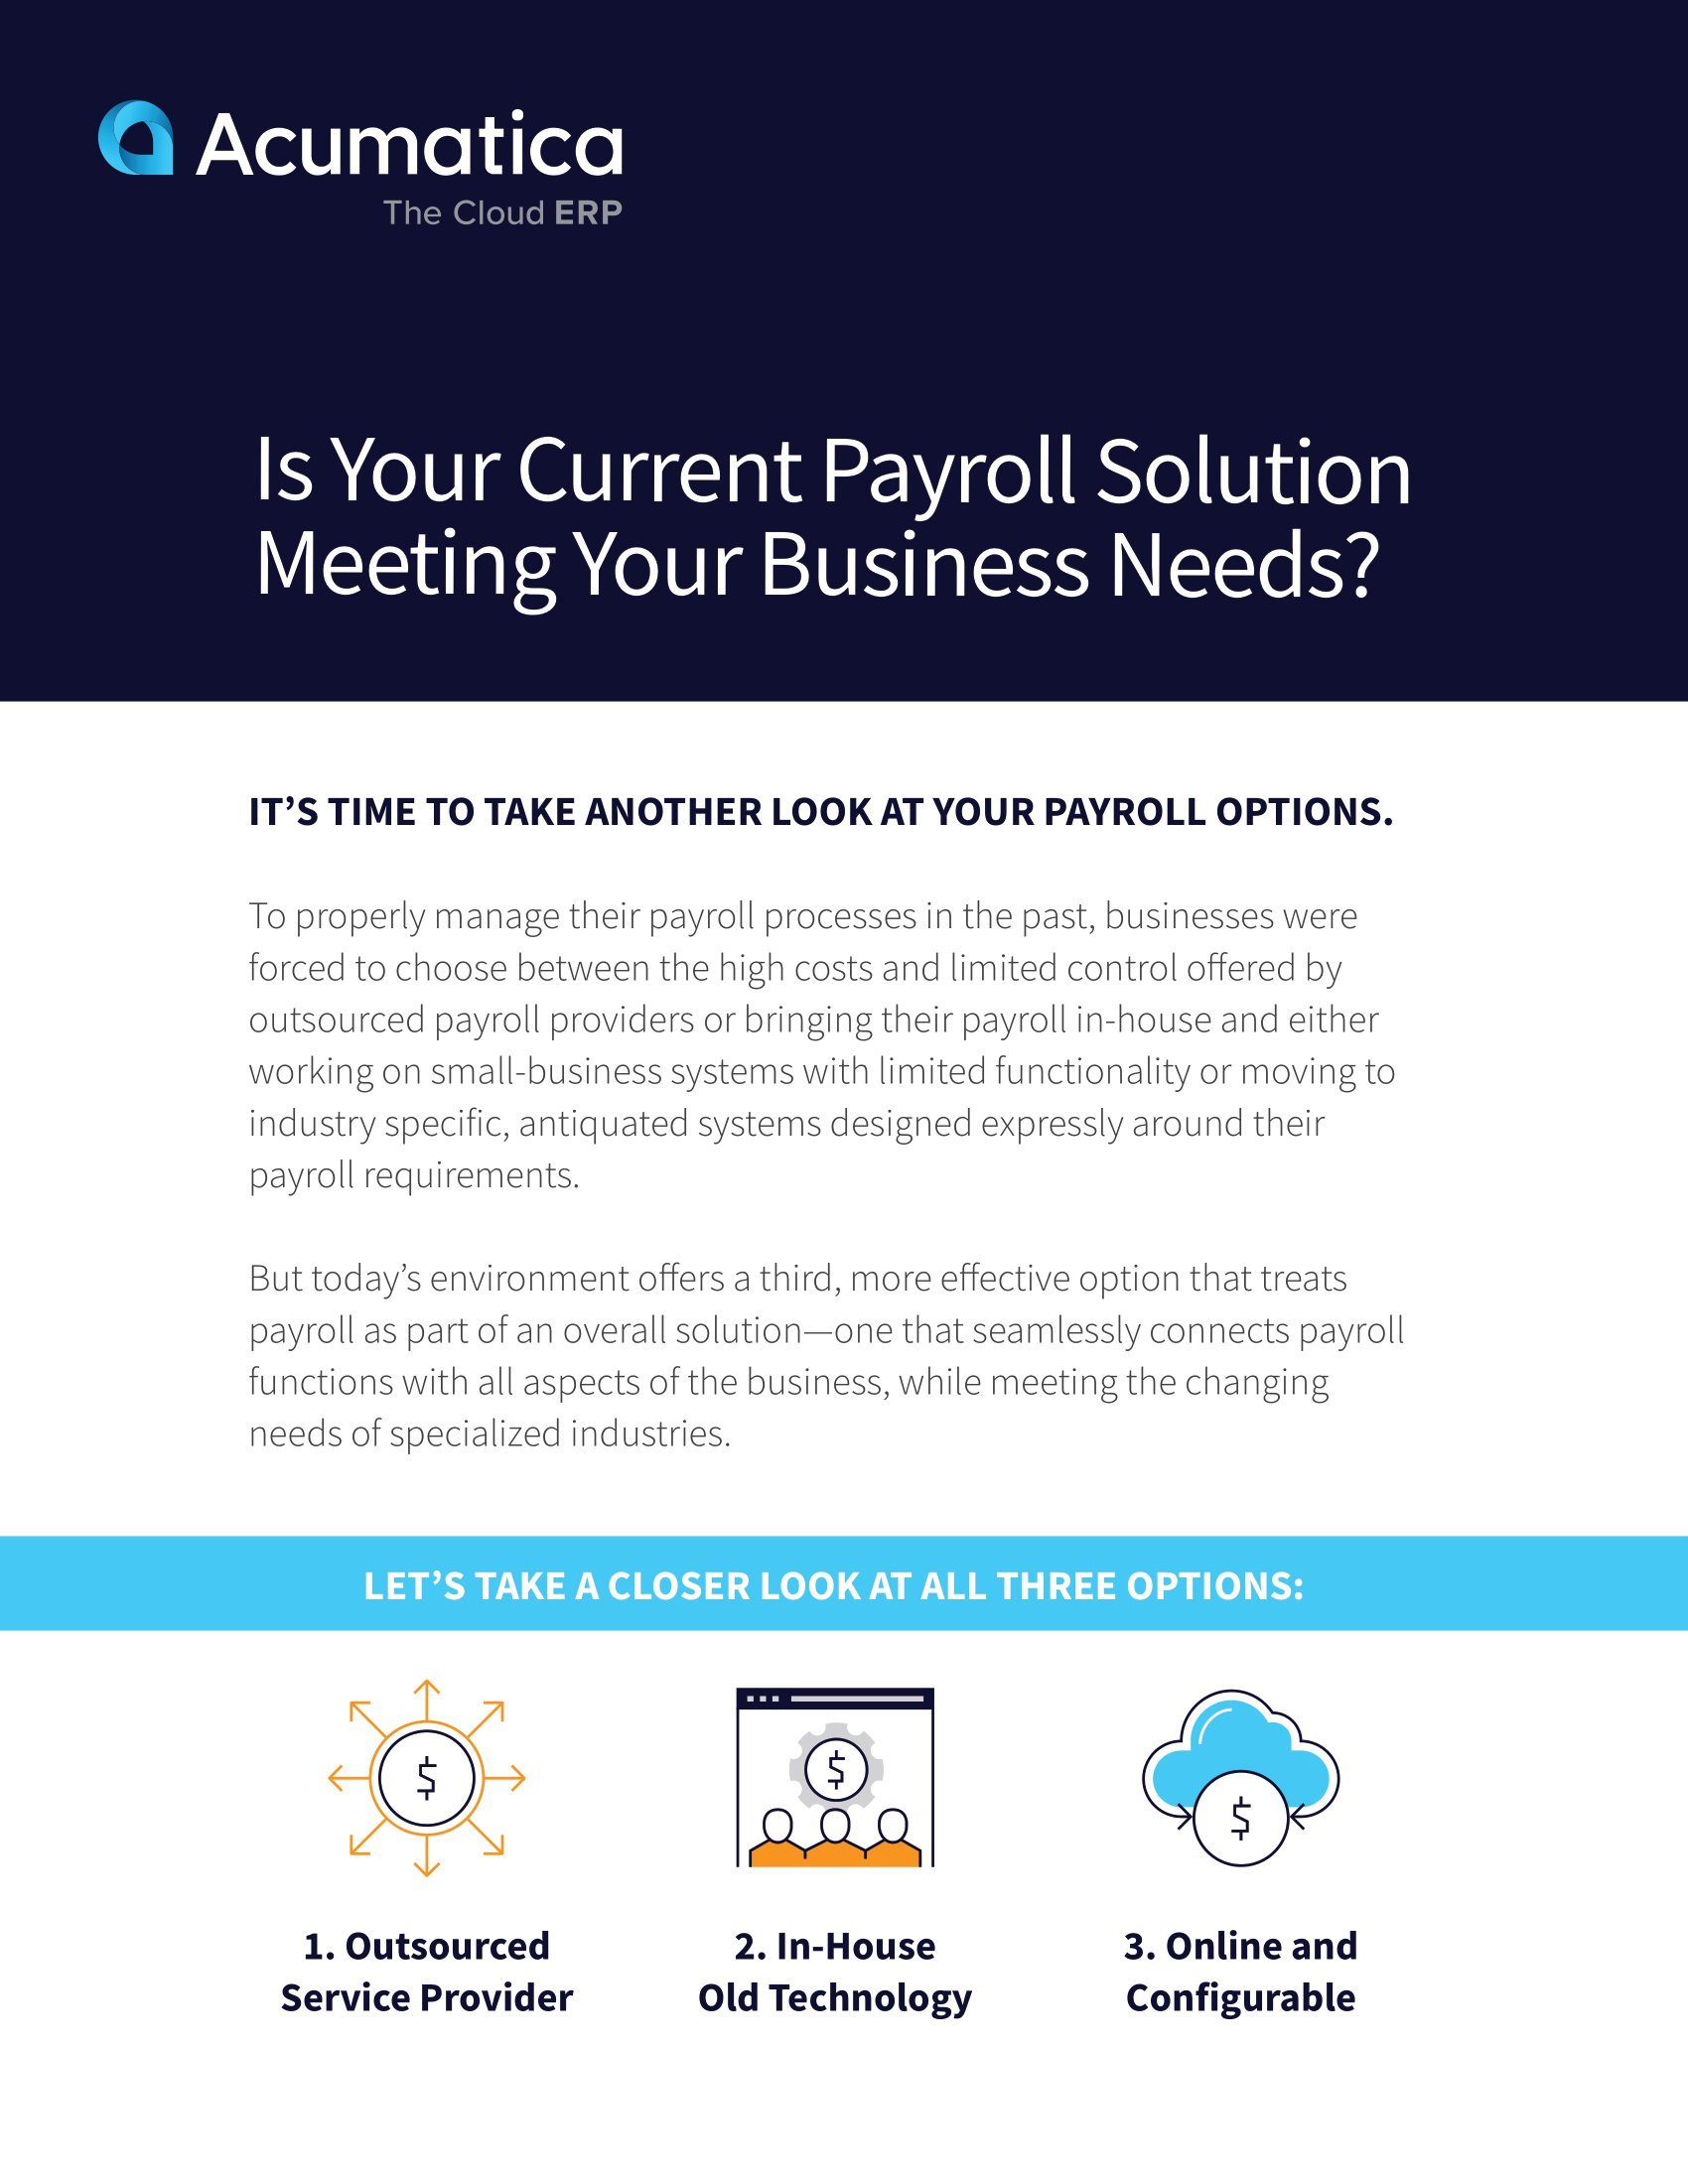 Is Your Current Payroll Solution Meeting Your Business Needs?